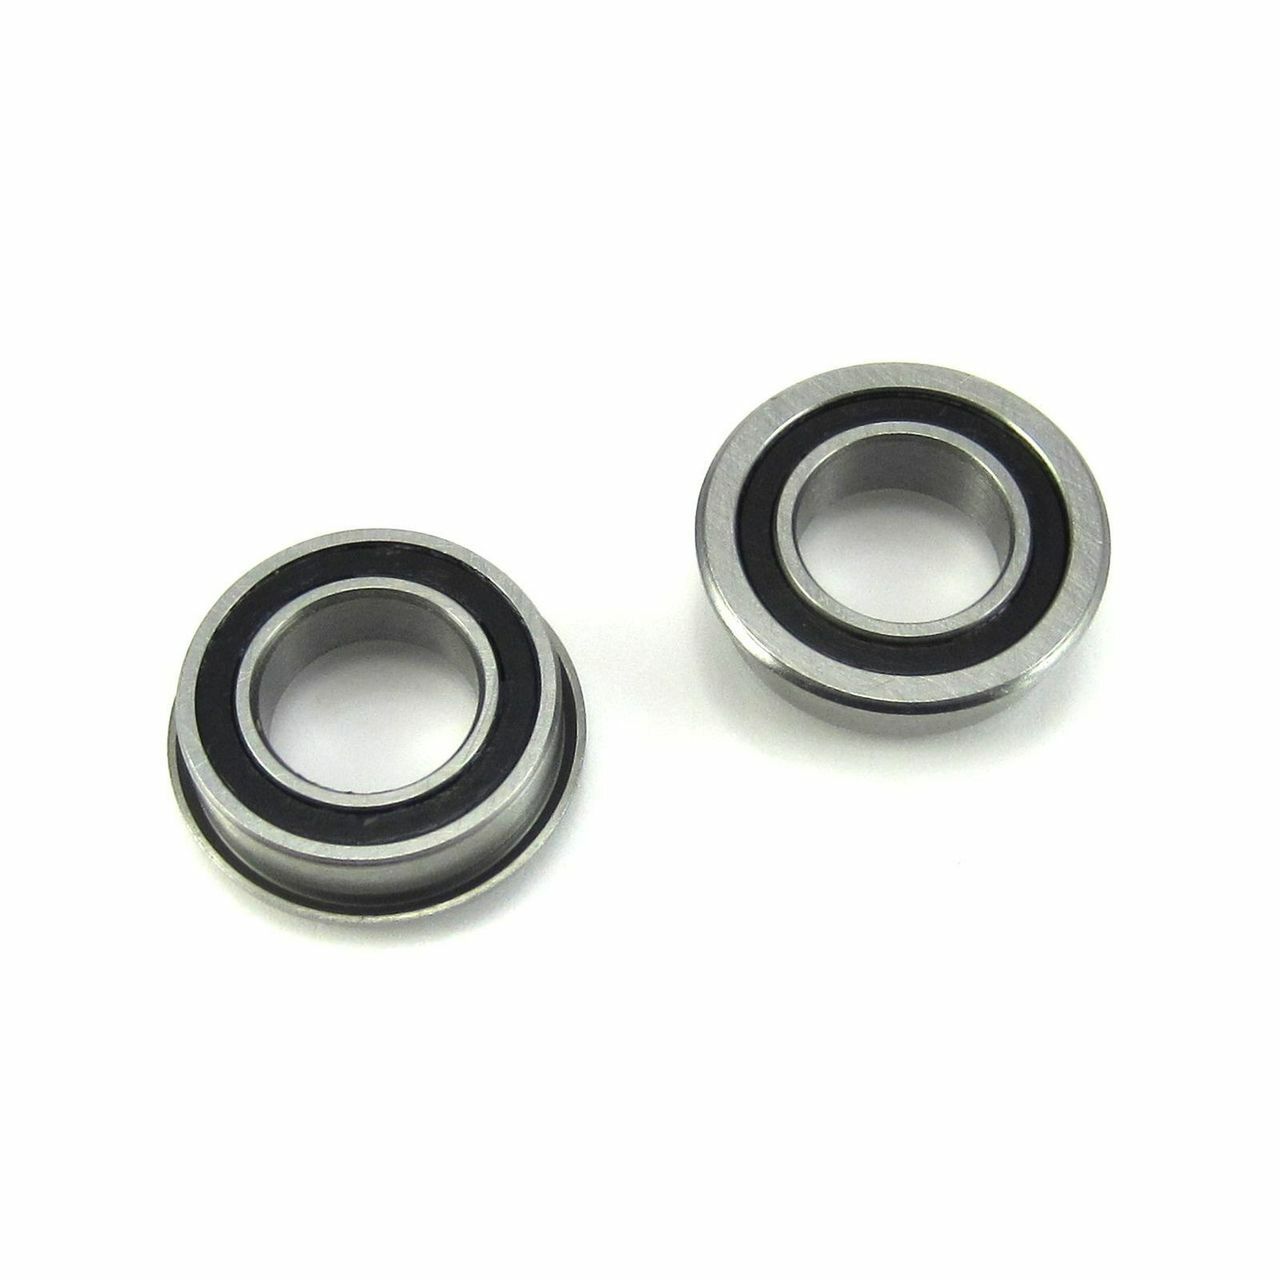 MF148-2RS 8x14x4mm Flanged Precision High Speed RC Car Ball Bearing, Chrome Steel with Black Rubber Seals ABEC-1 ABEC-3 ABEC-5